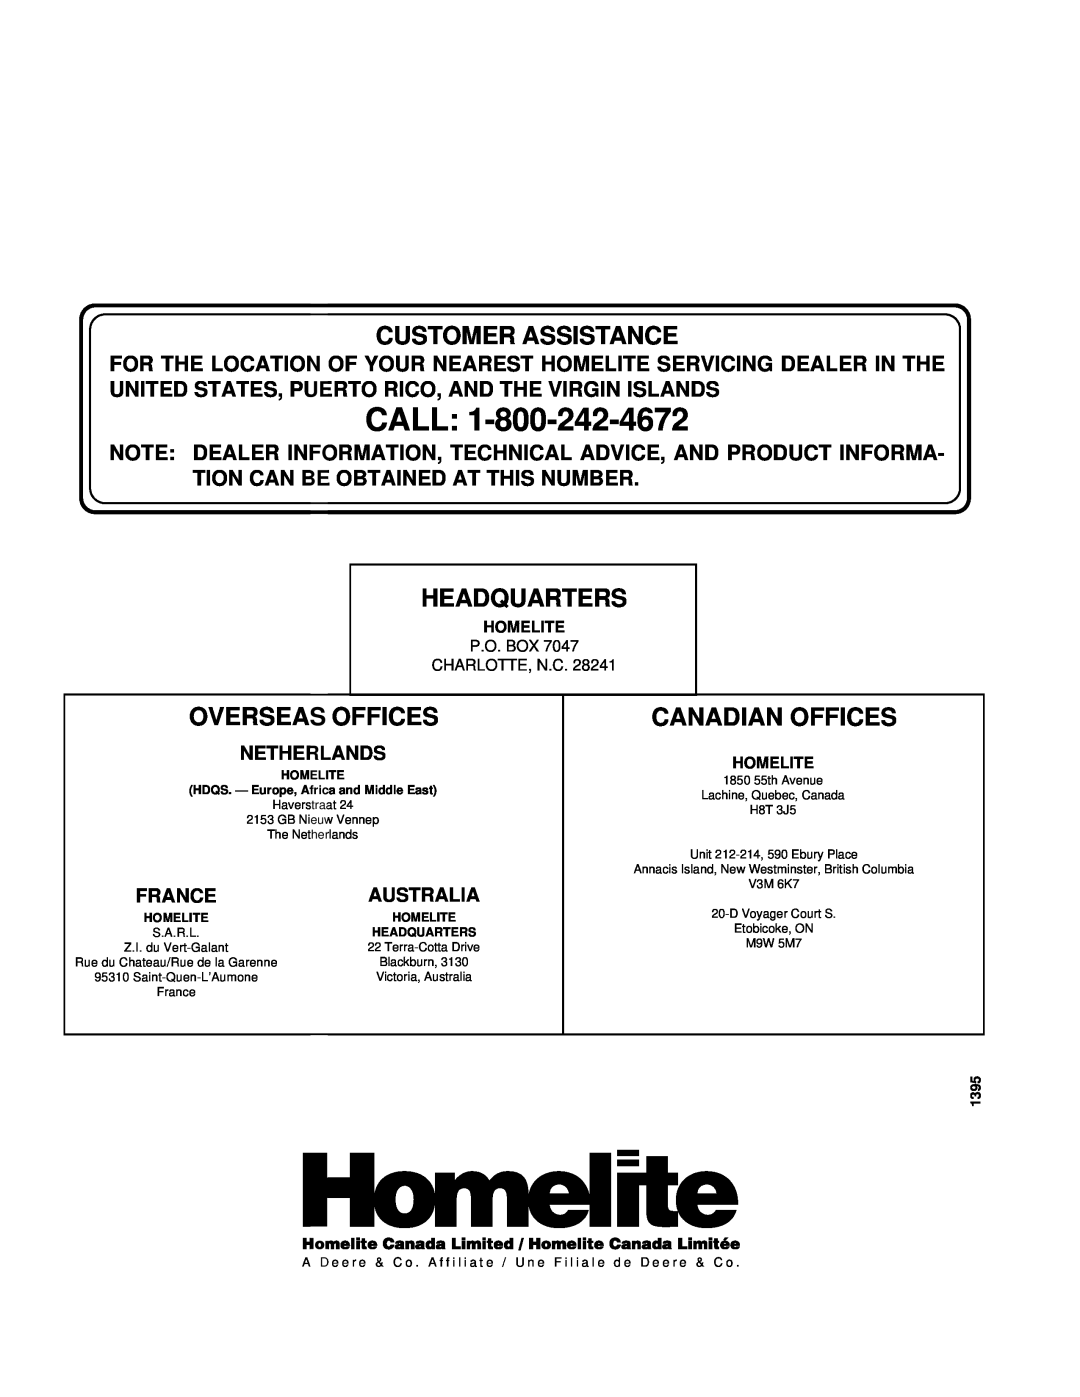 Homelite HHC50LP owner manual Call, Customer Assistance, Headquarters, Overseas Offices, Canadian Offices 